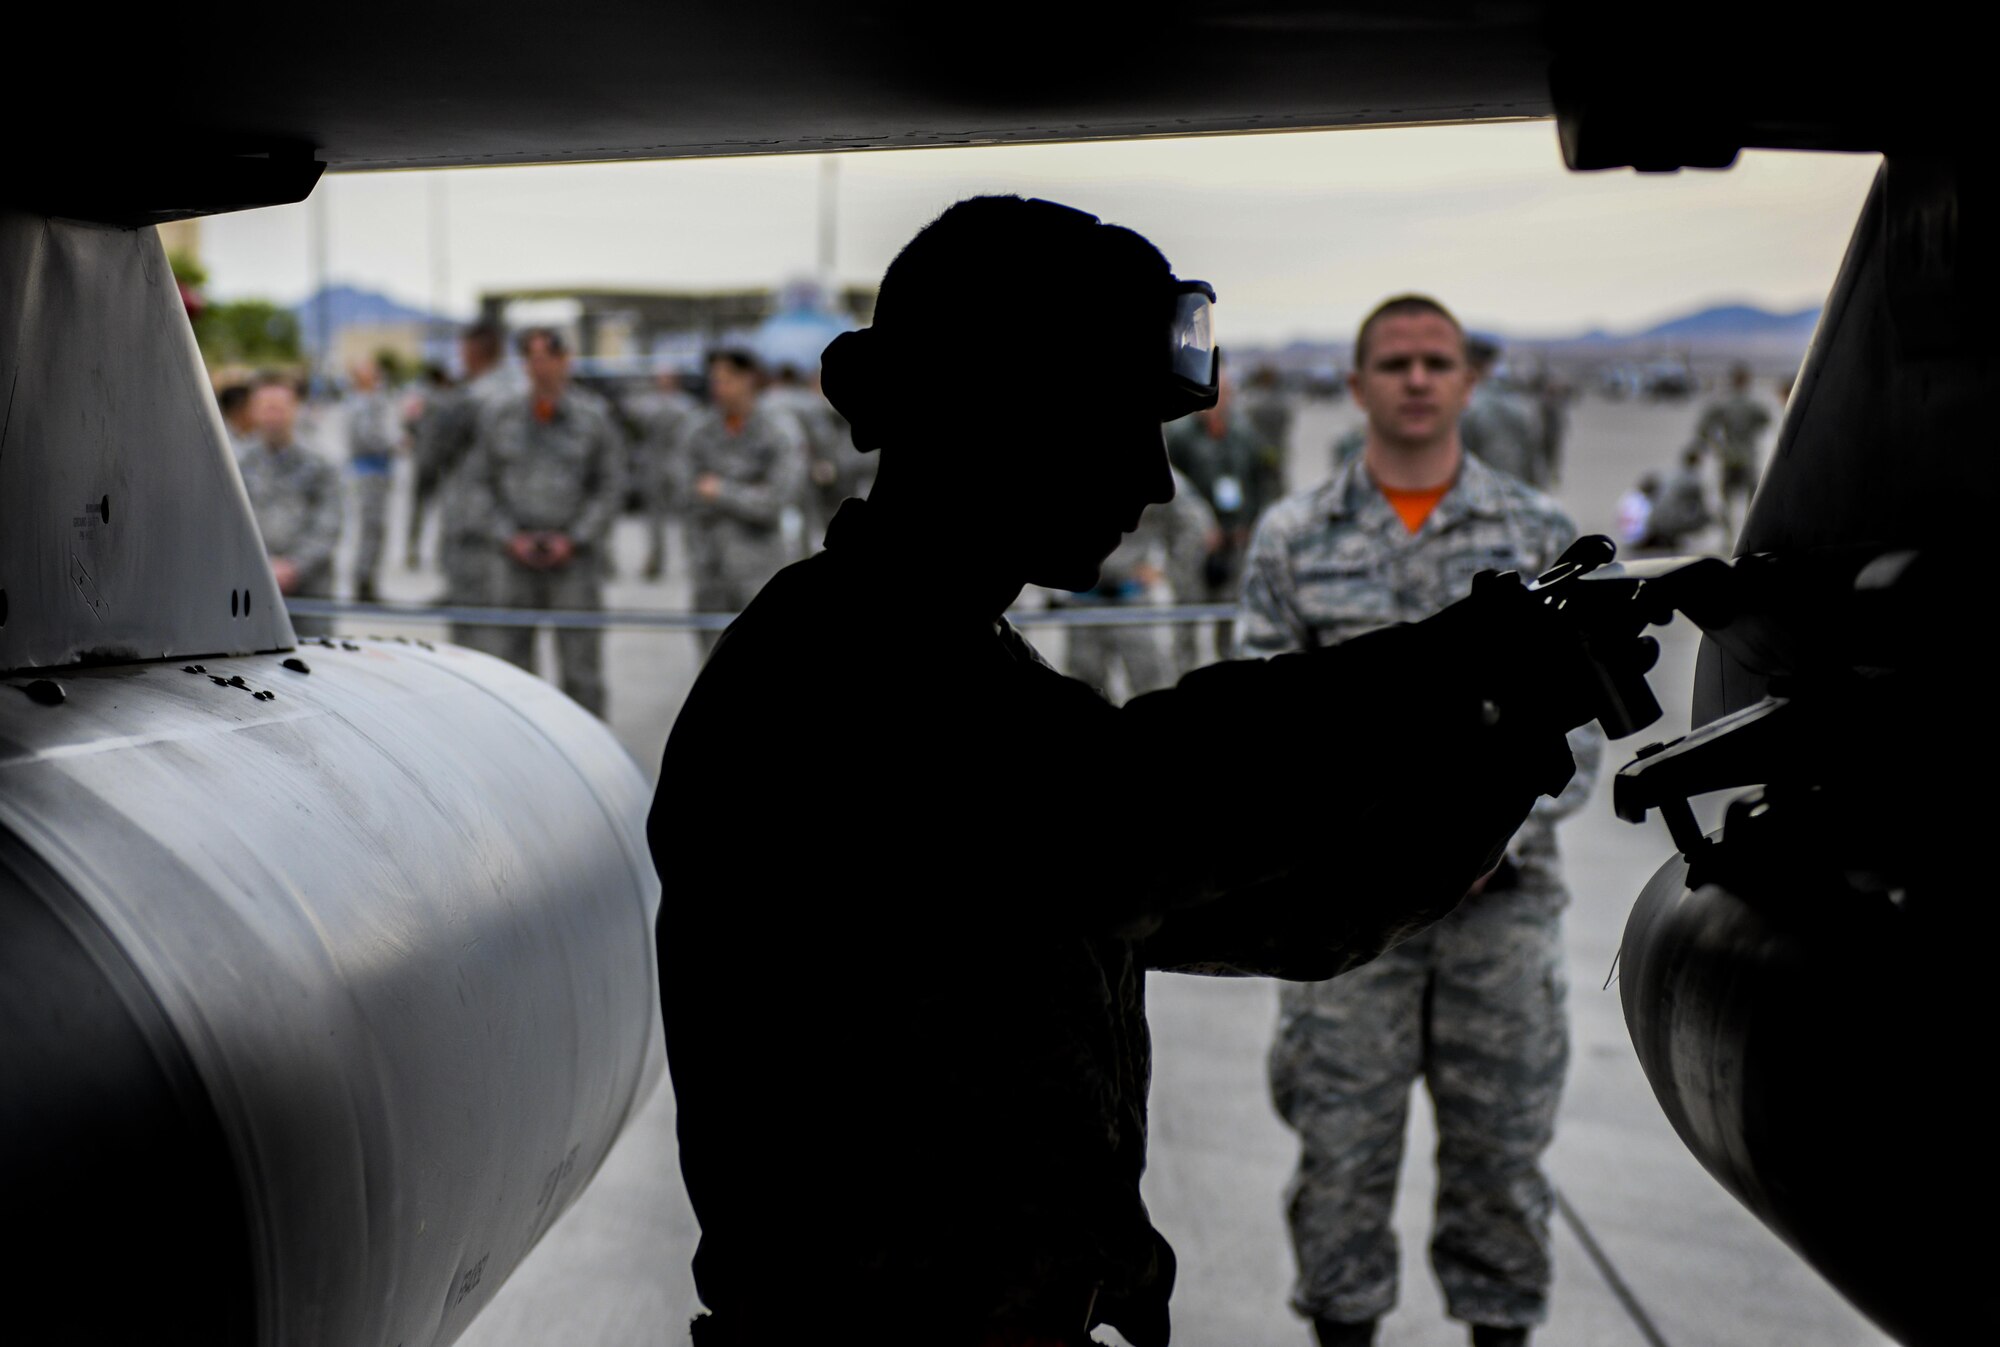 An Airman participates in the 57th Wing Load Crew of the Quarter Competition at Nellis Air Force Base, Nev., April 8, 2016. The competitions give weapons loaders throughout the 57th Maintenance Group the opportunity to display their war-fighting skills to their peers and superiors. (U.S. Air Force photo by Nathan Byrnes)